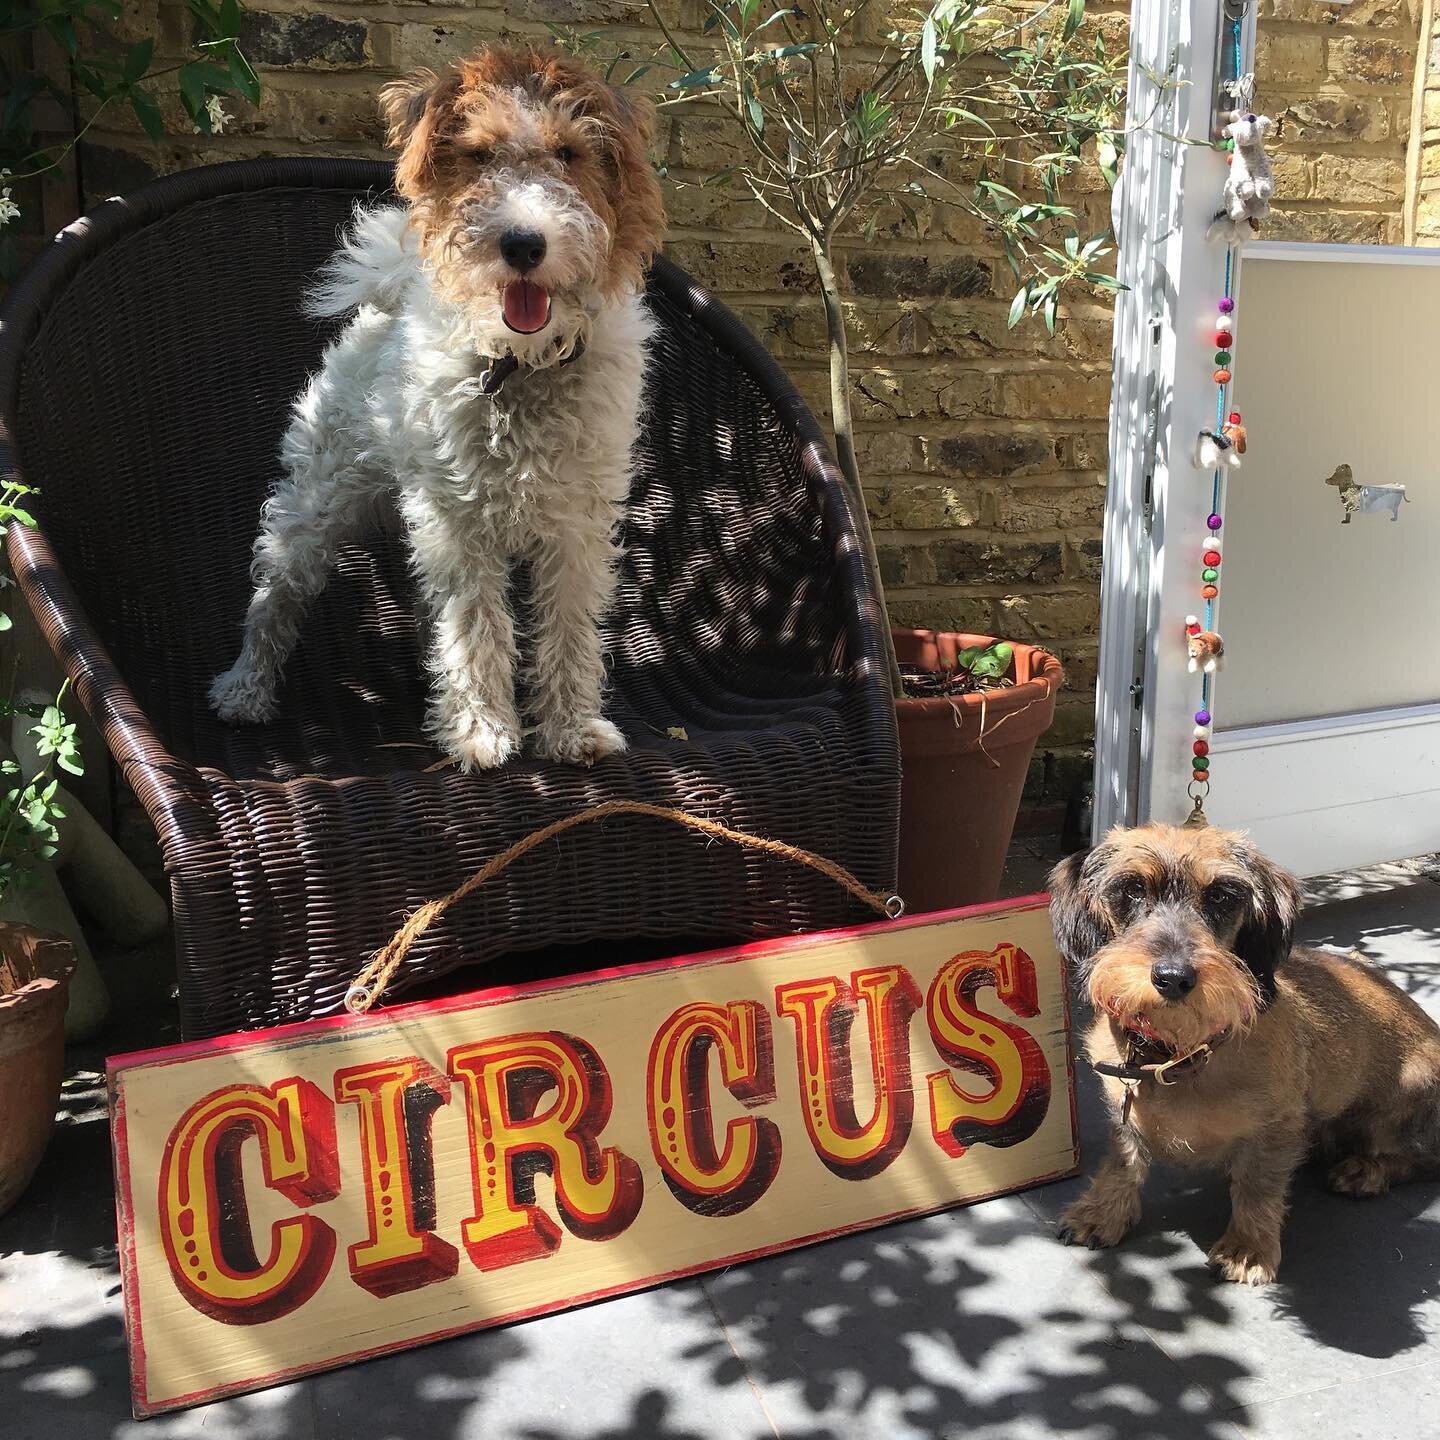 Wales, in the UK, banned the use of wild animals in Circuses today. Unbelievable we have to get to 2020 before this happened, especially as we all know that the *only* animals any Circus needs are dogs! 🎪🐶 #incrediblyclever #caninecircus #circusdog